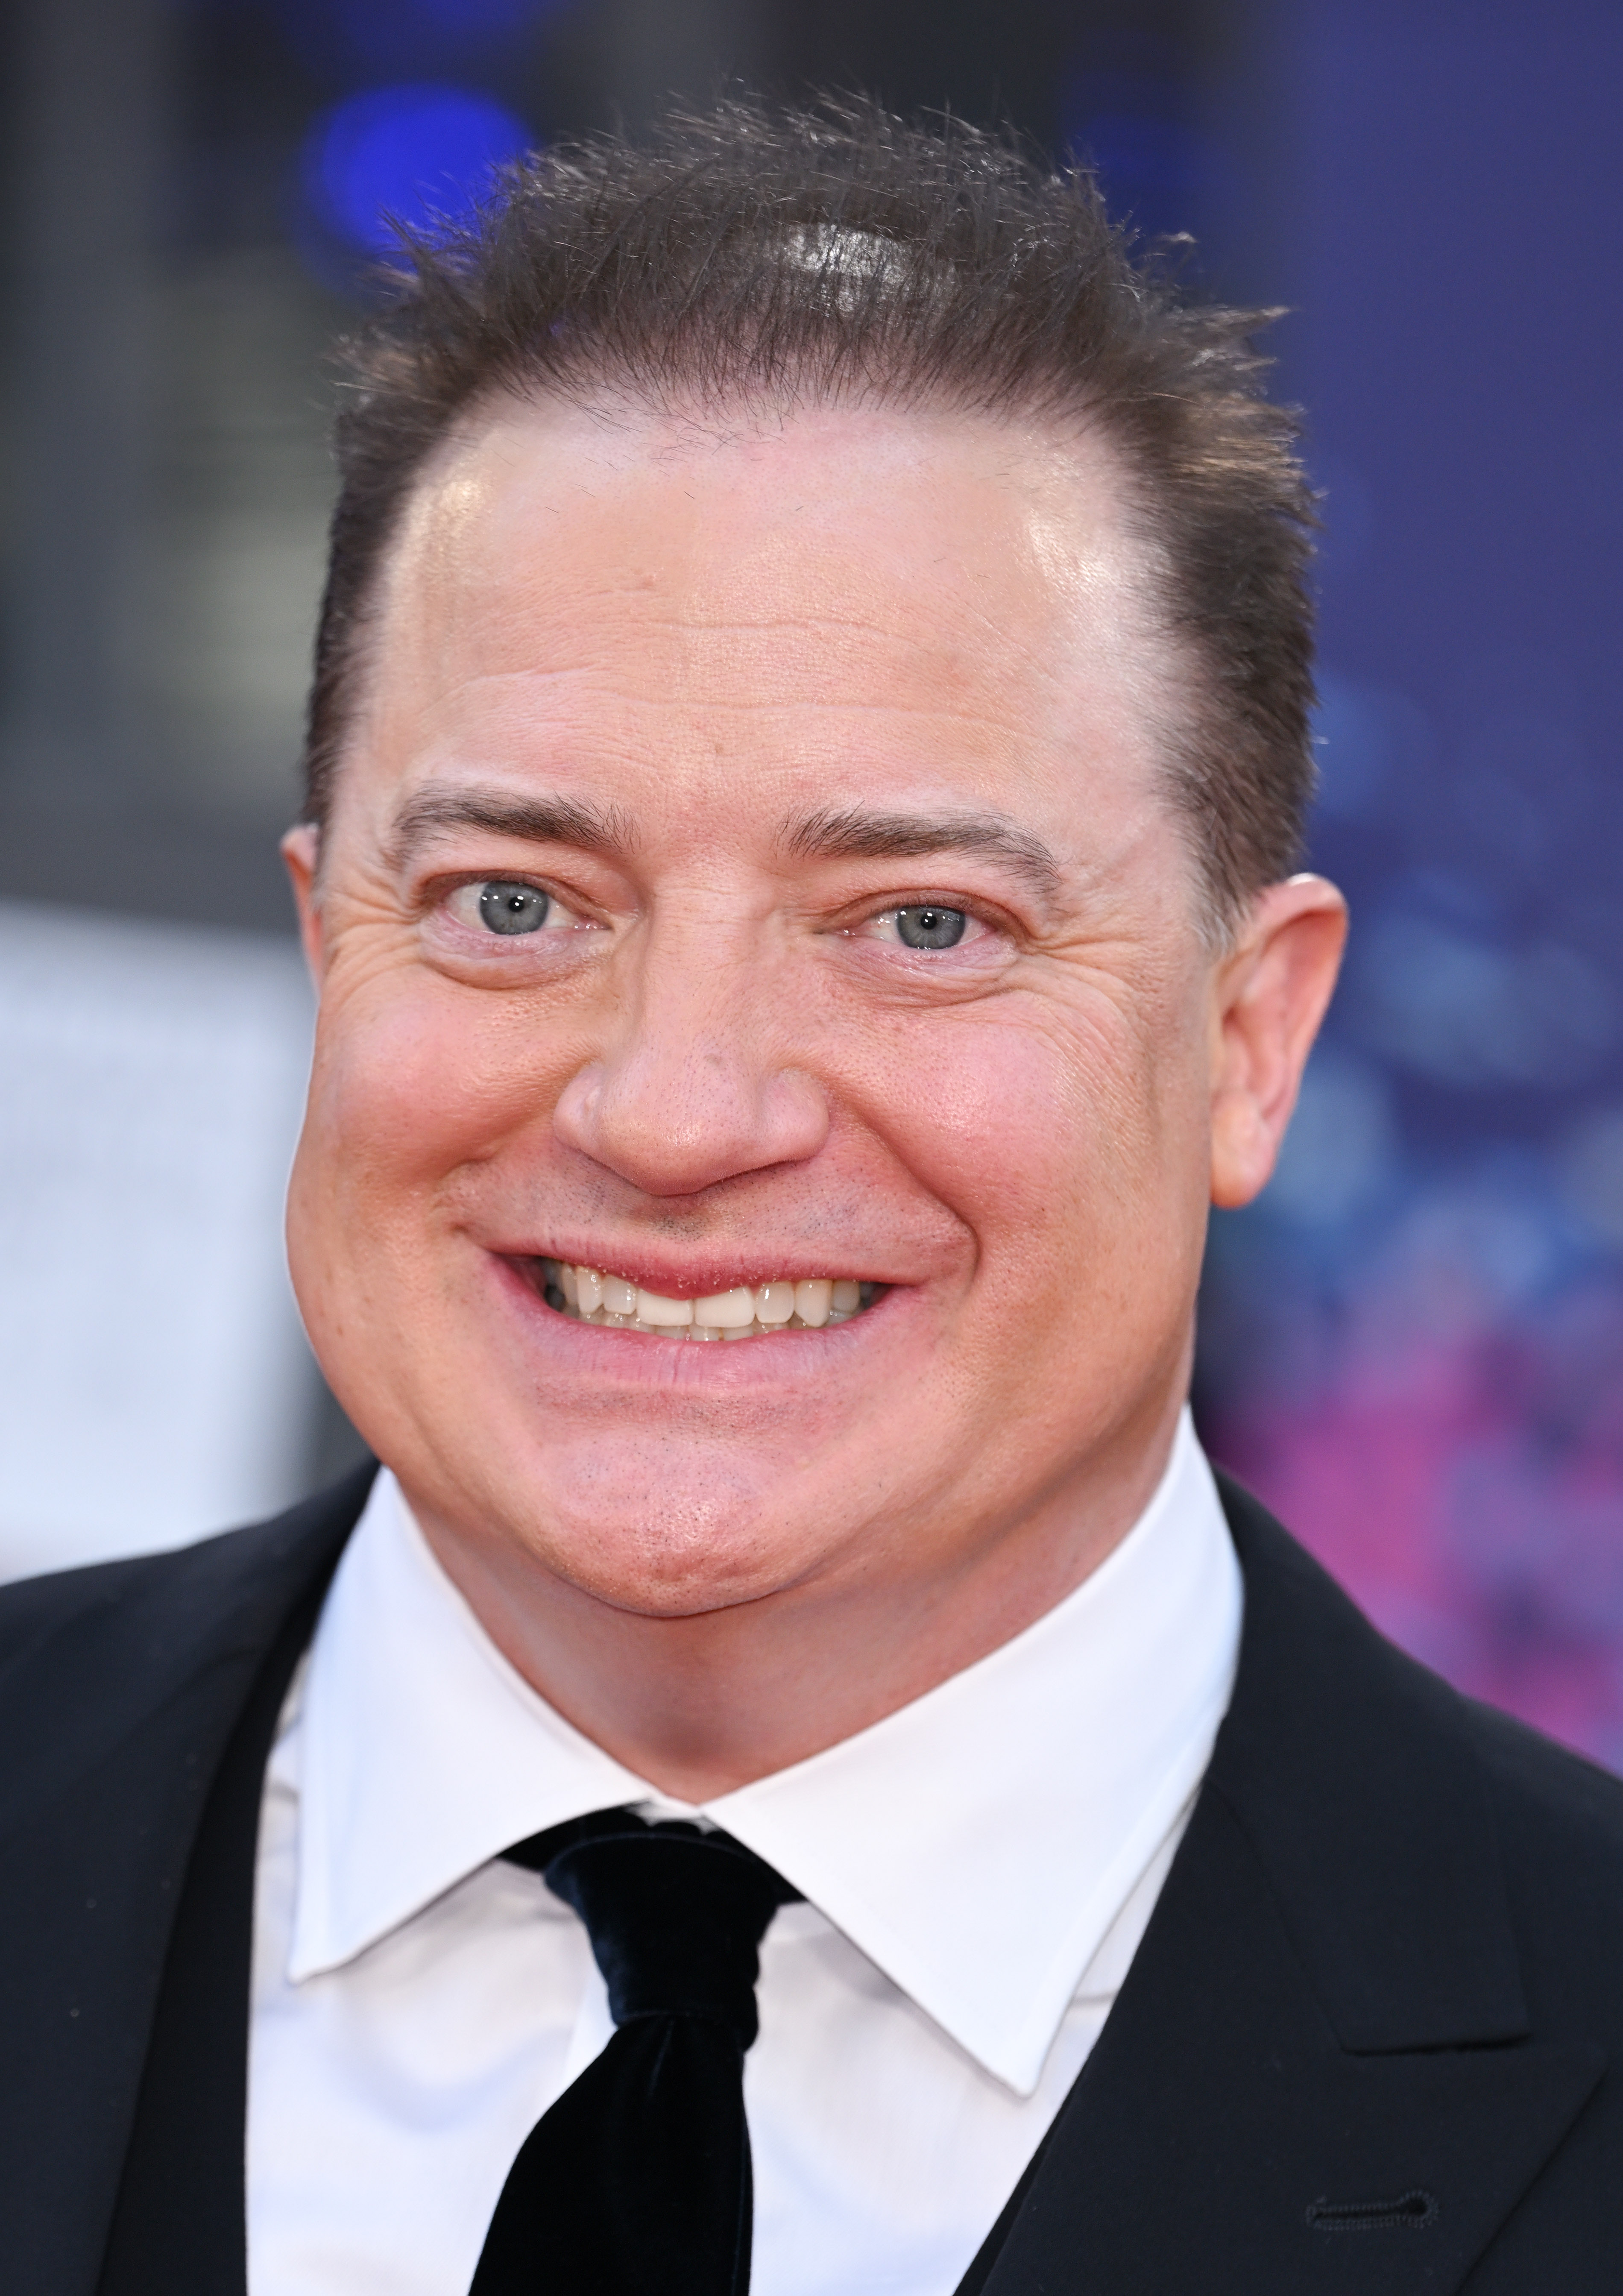 Brendan Fraser at the U,K. premiere of "The Whale" at the 66th BFI London Film Festival at The Royal Festival Hall on October 11, 2022 in London, England | Source: Getty Images